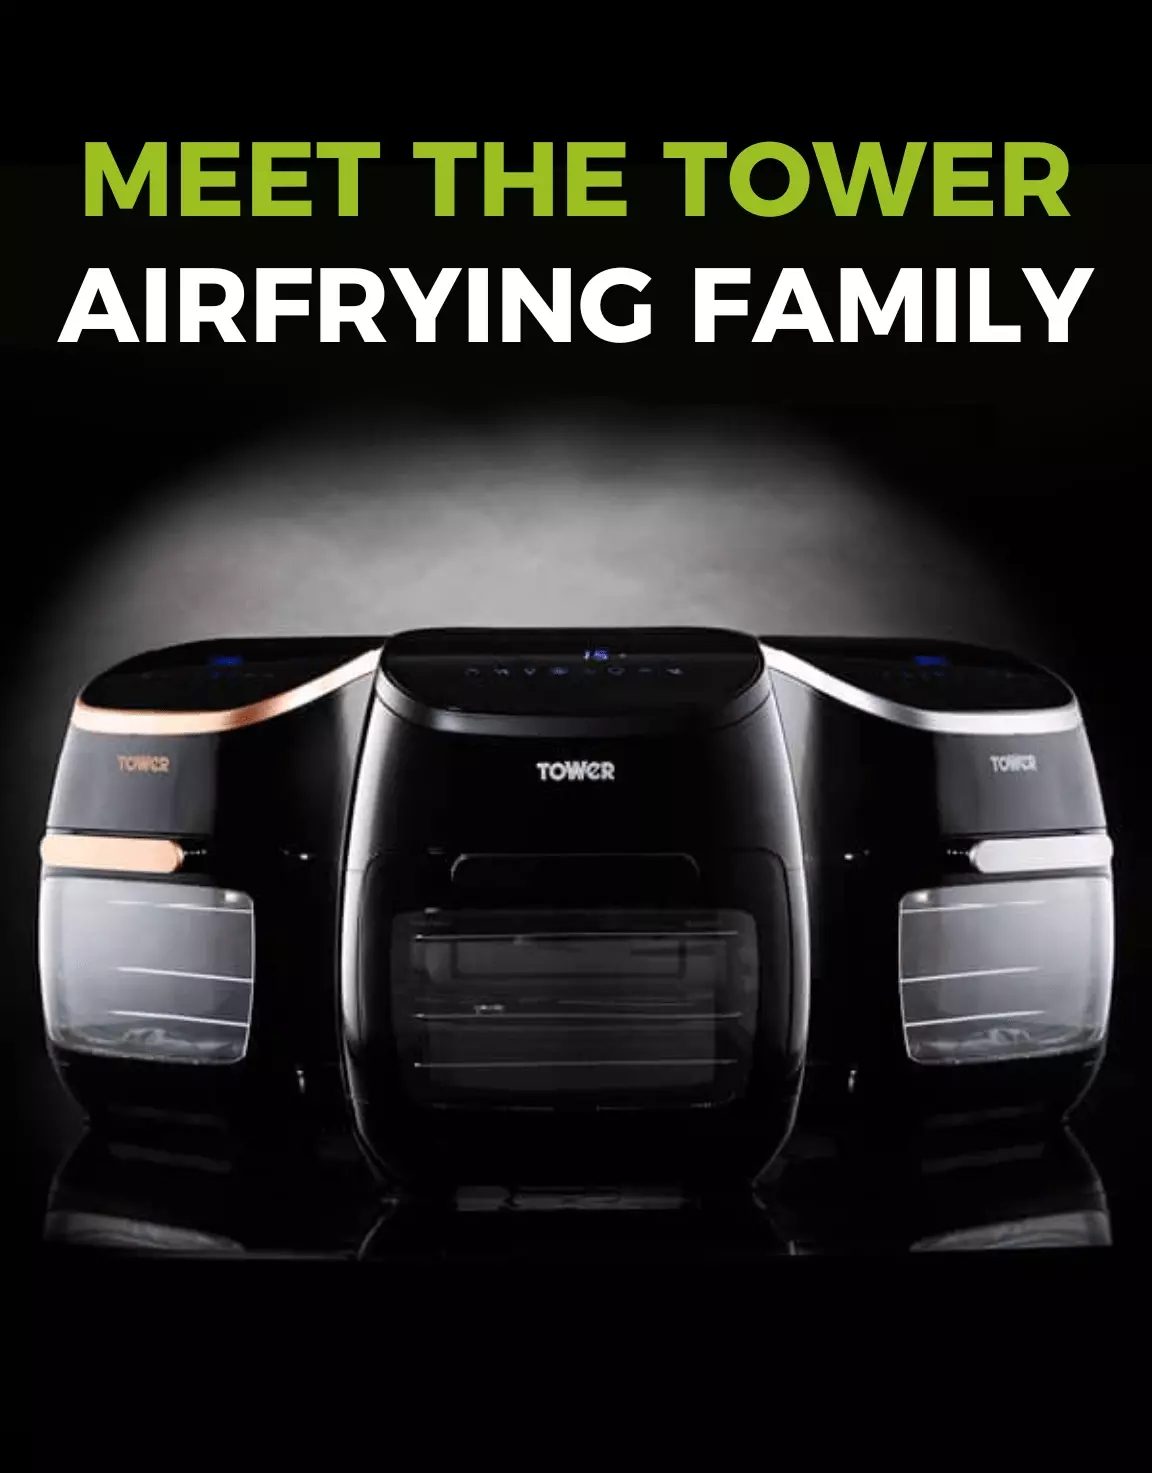 tower air frying family moibile min.png